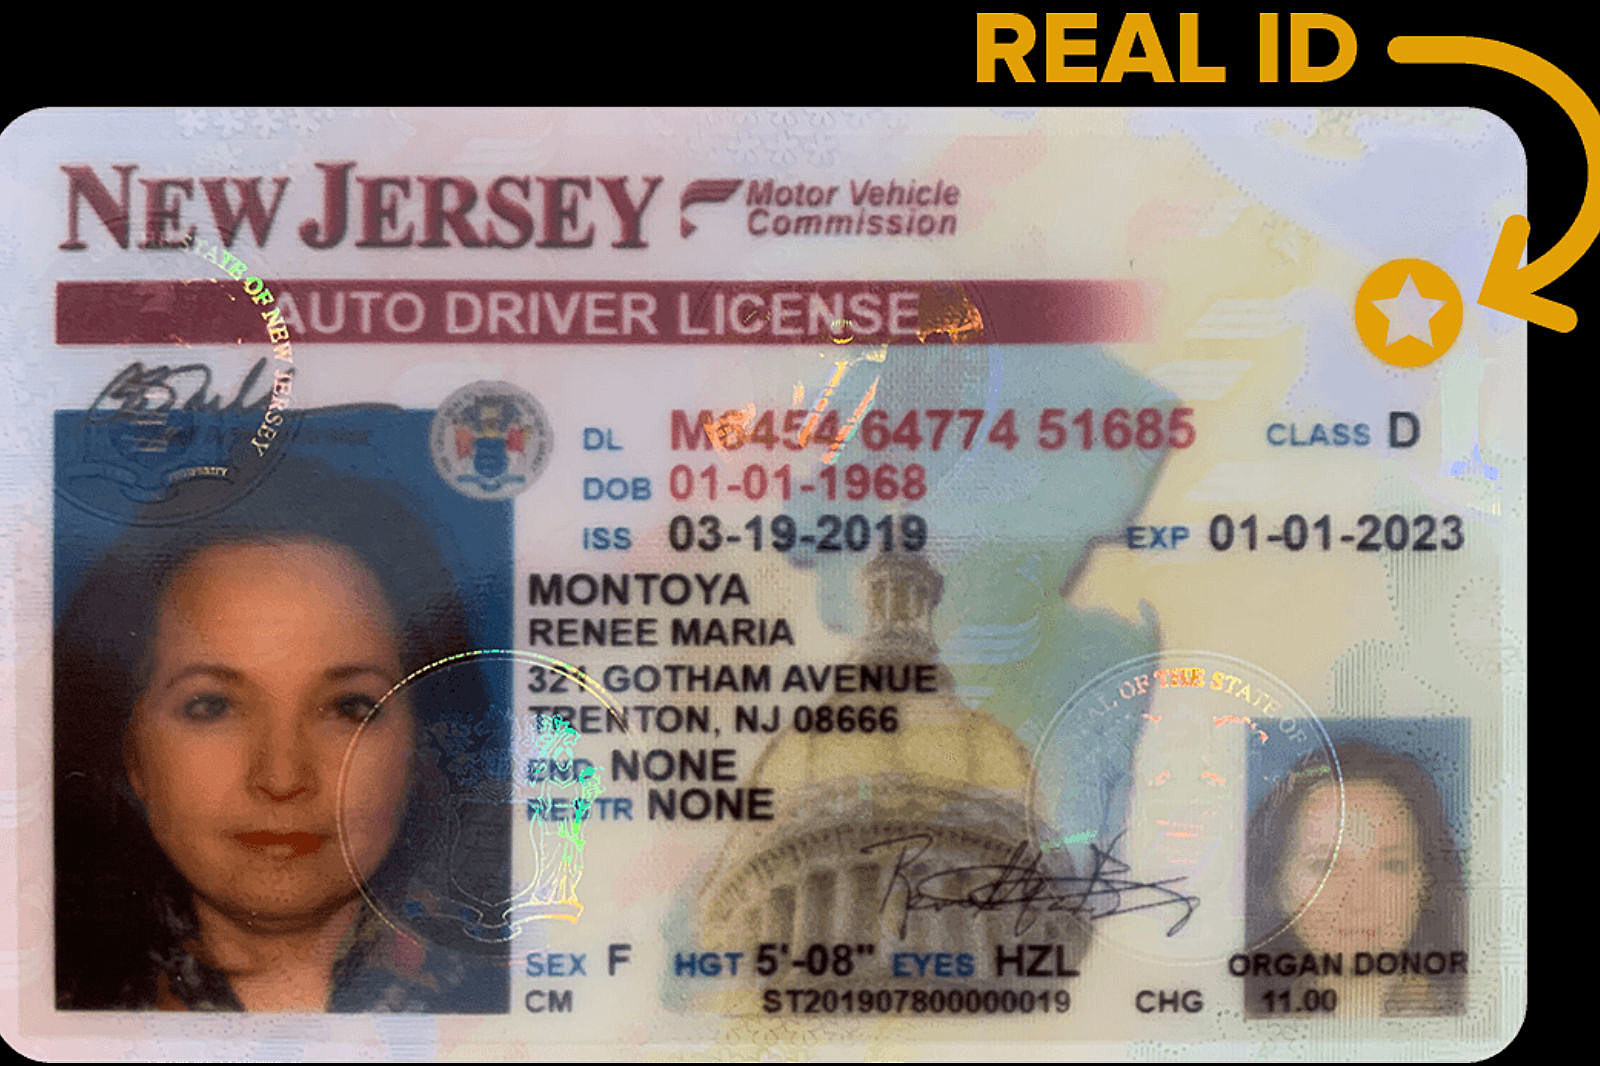 Real IDs not ready for NJ public yet 